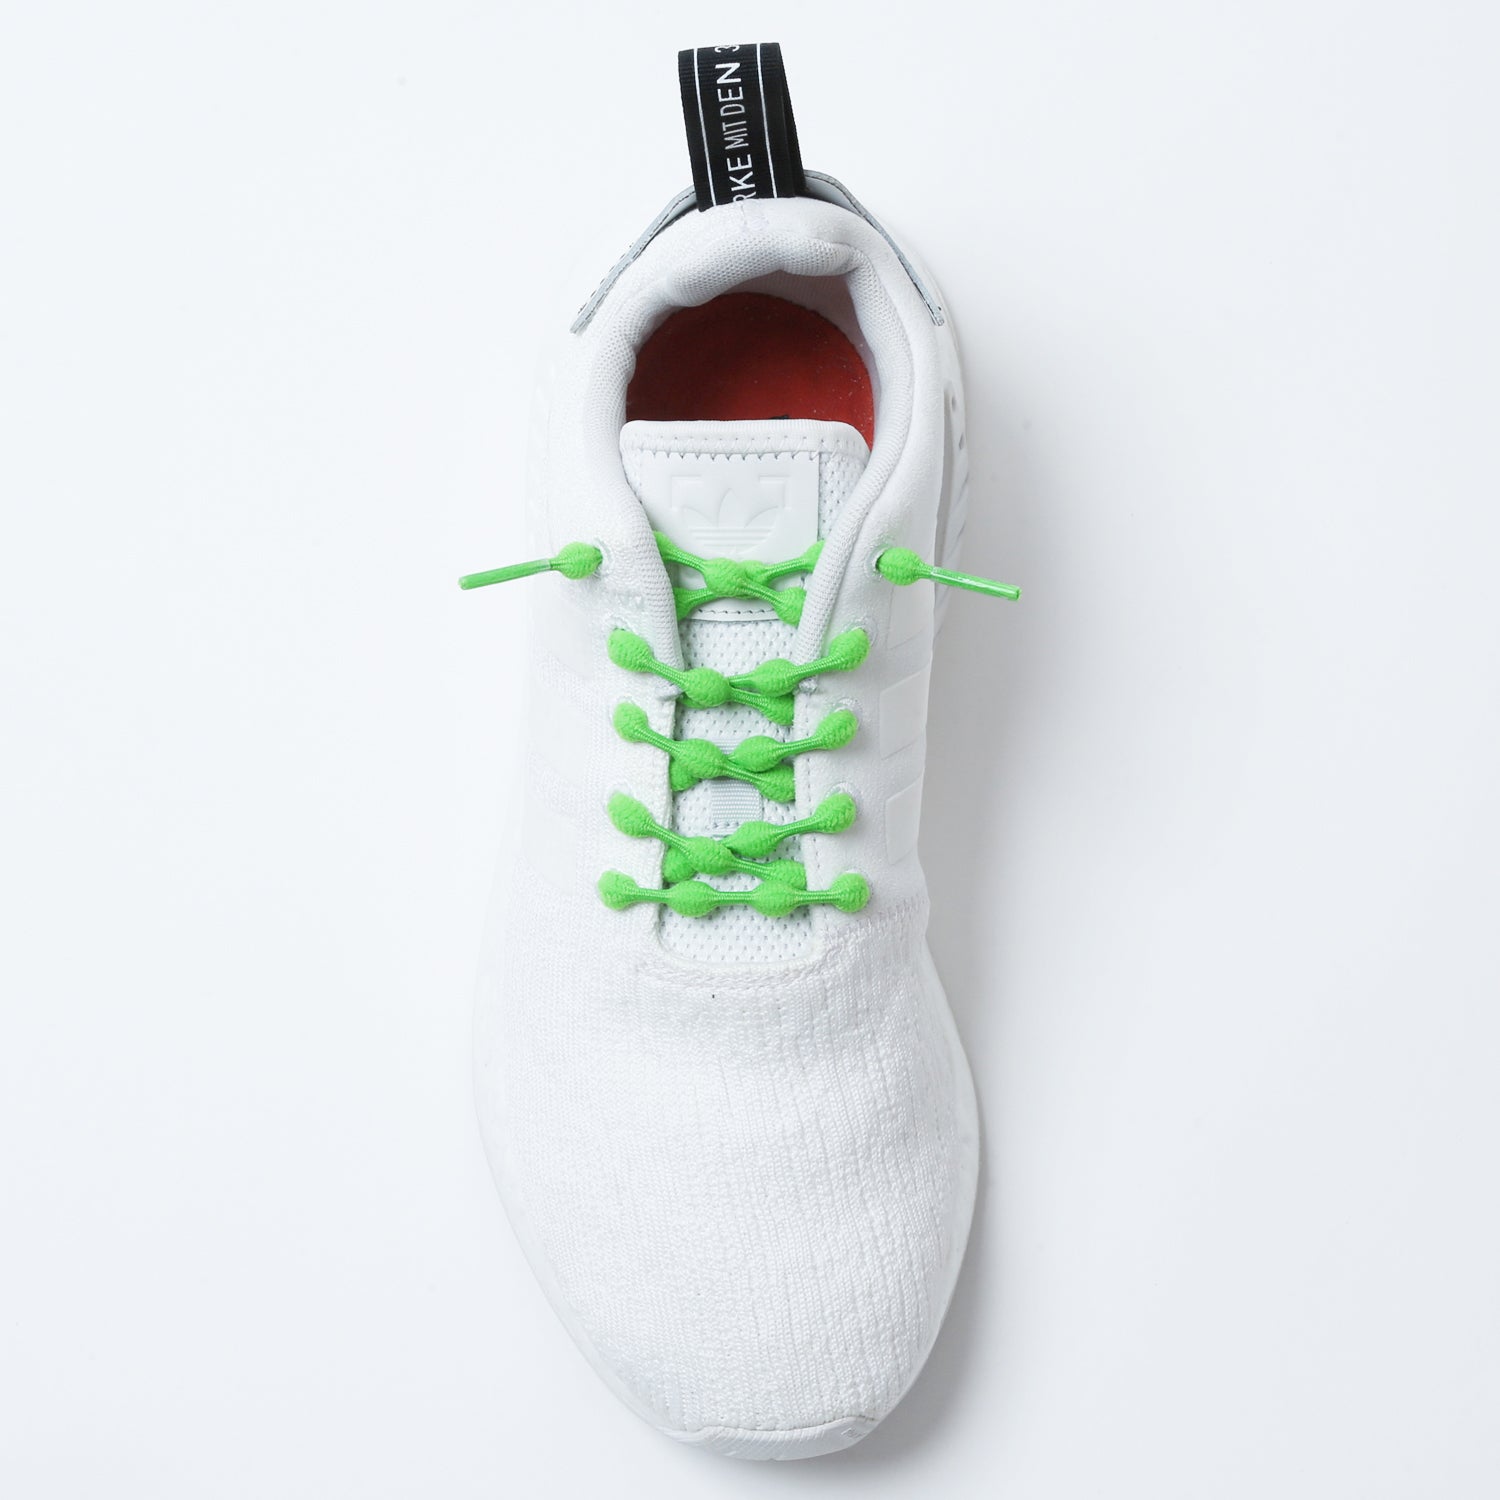 Individualitet os selv pouch The Original No tie shoelace | Laces for runners | The Original - Caterpy  Run